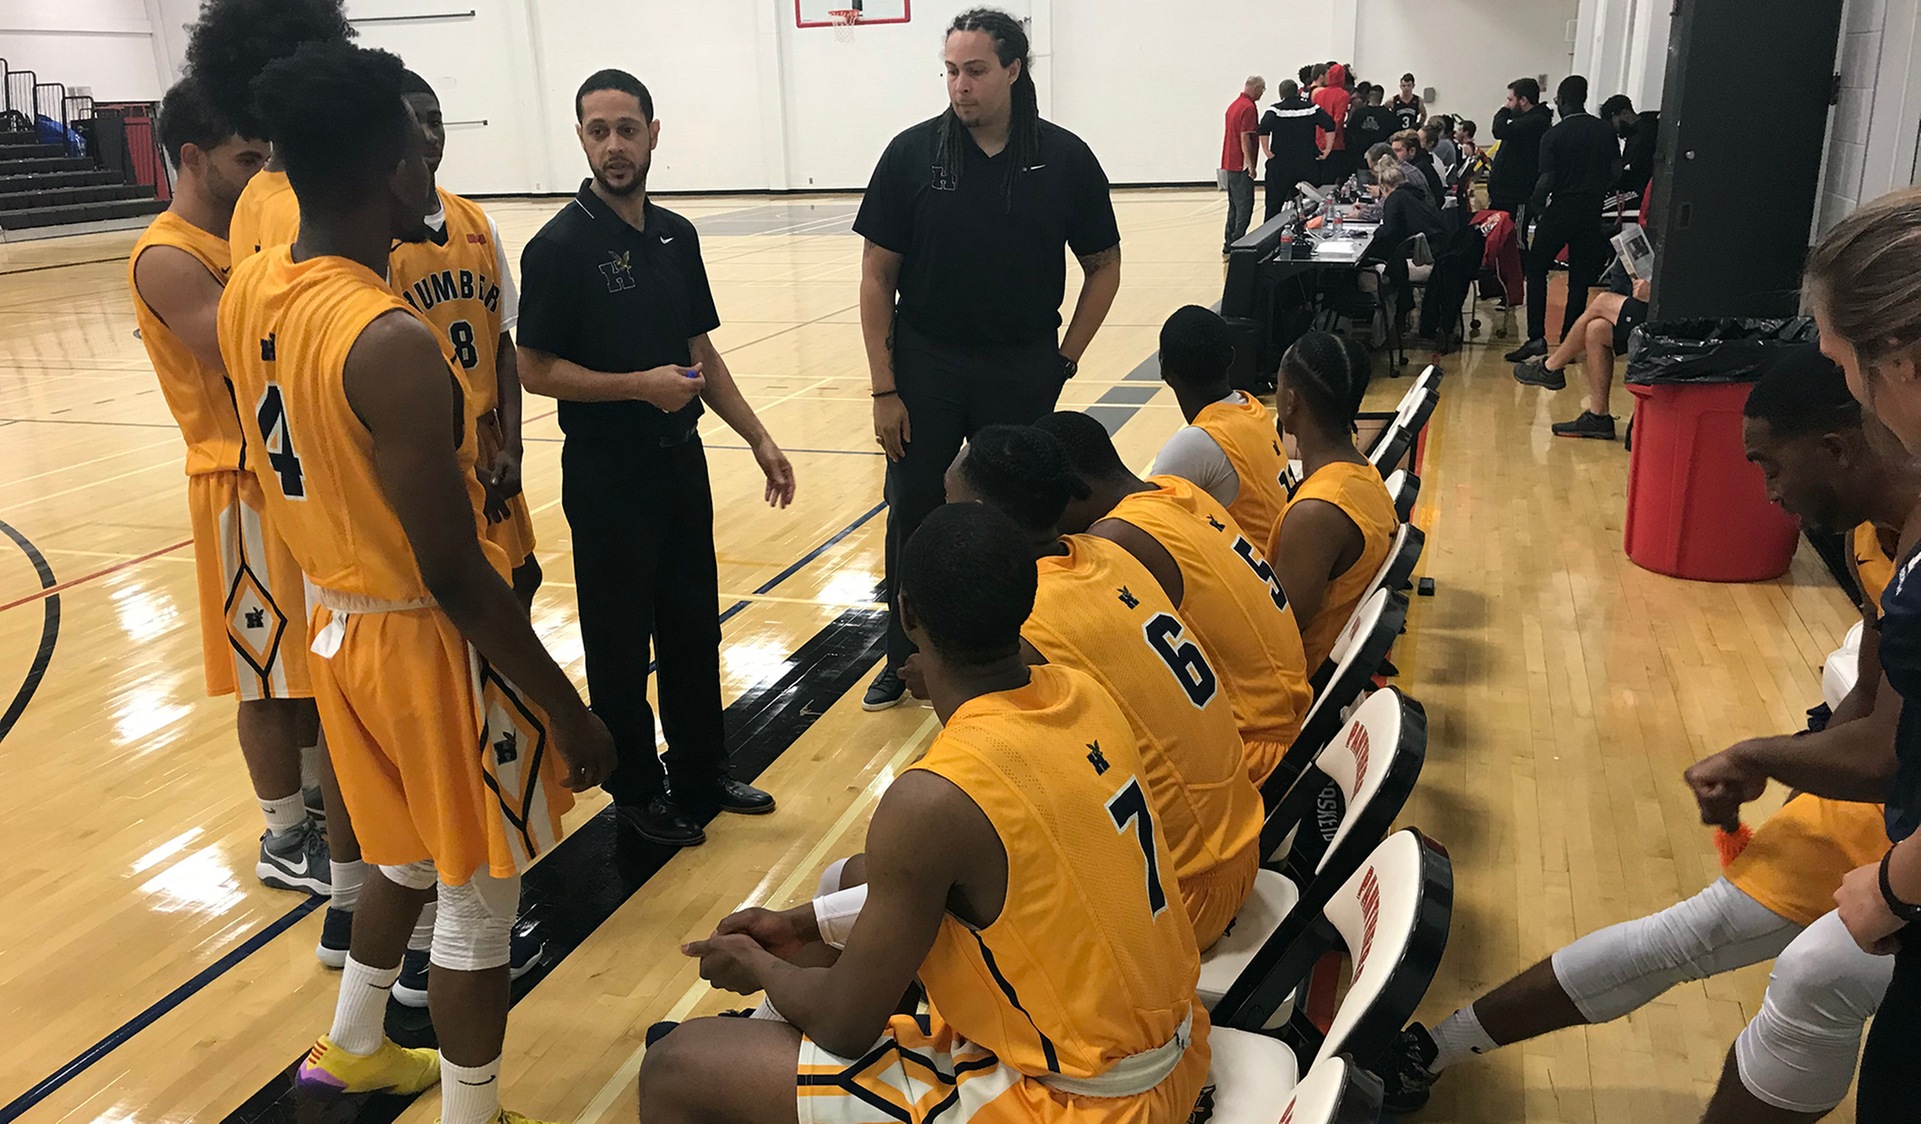 HAWKS KNOCK OFF CANADORE 97-70 TO OPEN NORTHERN EXHIBITION SWING